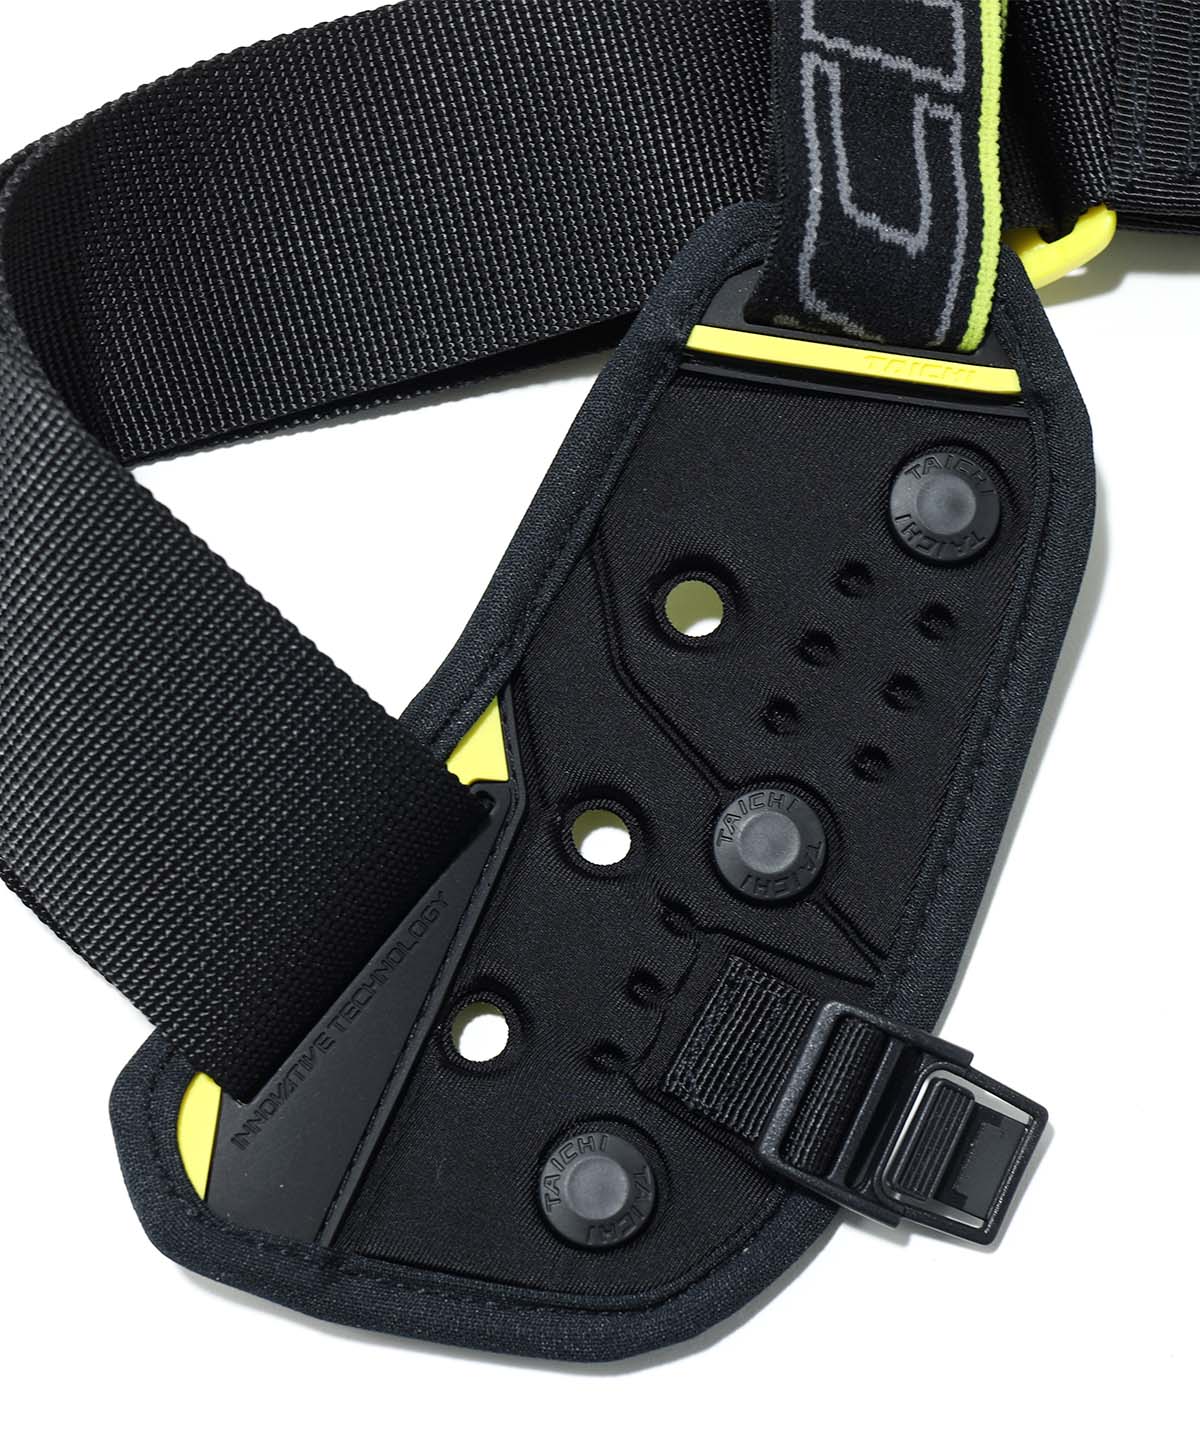 Fitting belt for CPS/black/yellow